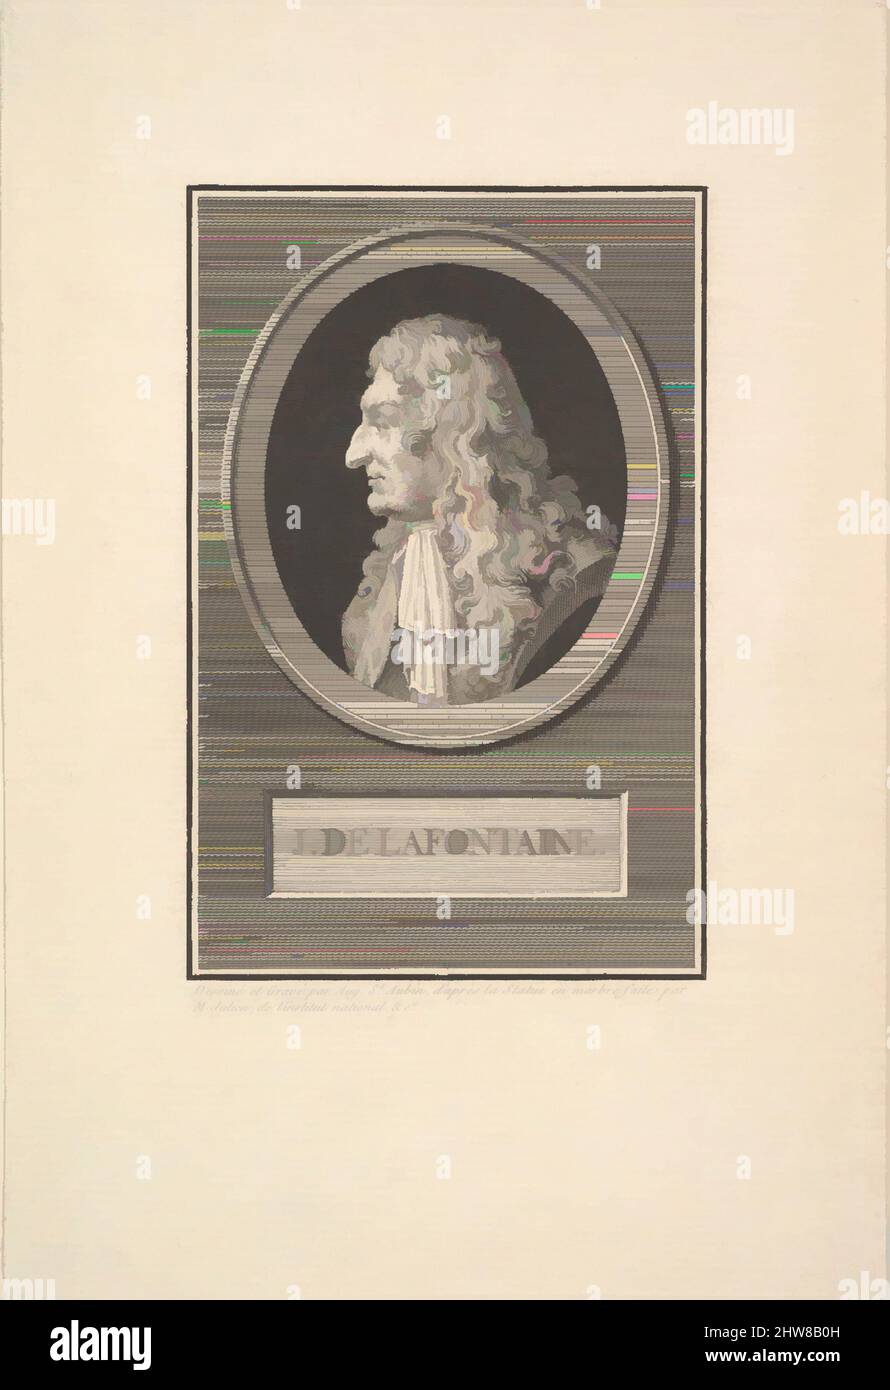 Art inspired by Portrait of Jean de la Fontaine, 1801, Etching and engraving; third state of three (Bocher), Sheet: 9 1/8 × 5 13/16 in. (23.2 × 14.7 cm), Prints, Augustin de Saint-Aubin (French, Paris 1736–1807 Paris), After M. Julien (French, Classic works modernized by Artotop with a splash of modernity. Shapes, color and value, eye-catching visual impact on art. Emotions through freedom of artworks in a contemporary way. A timeless message pursuing a wildly creative new direction. Artists turning to the digital medium and creating the Artotop NFT Stock Photo